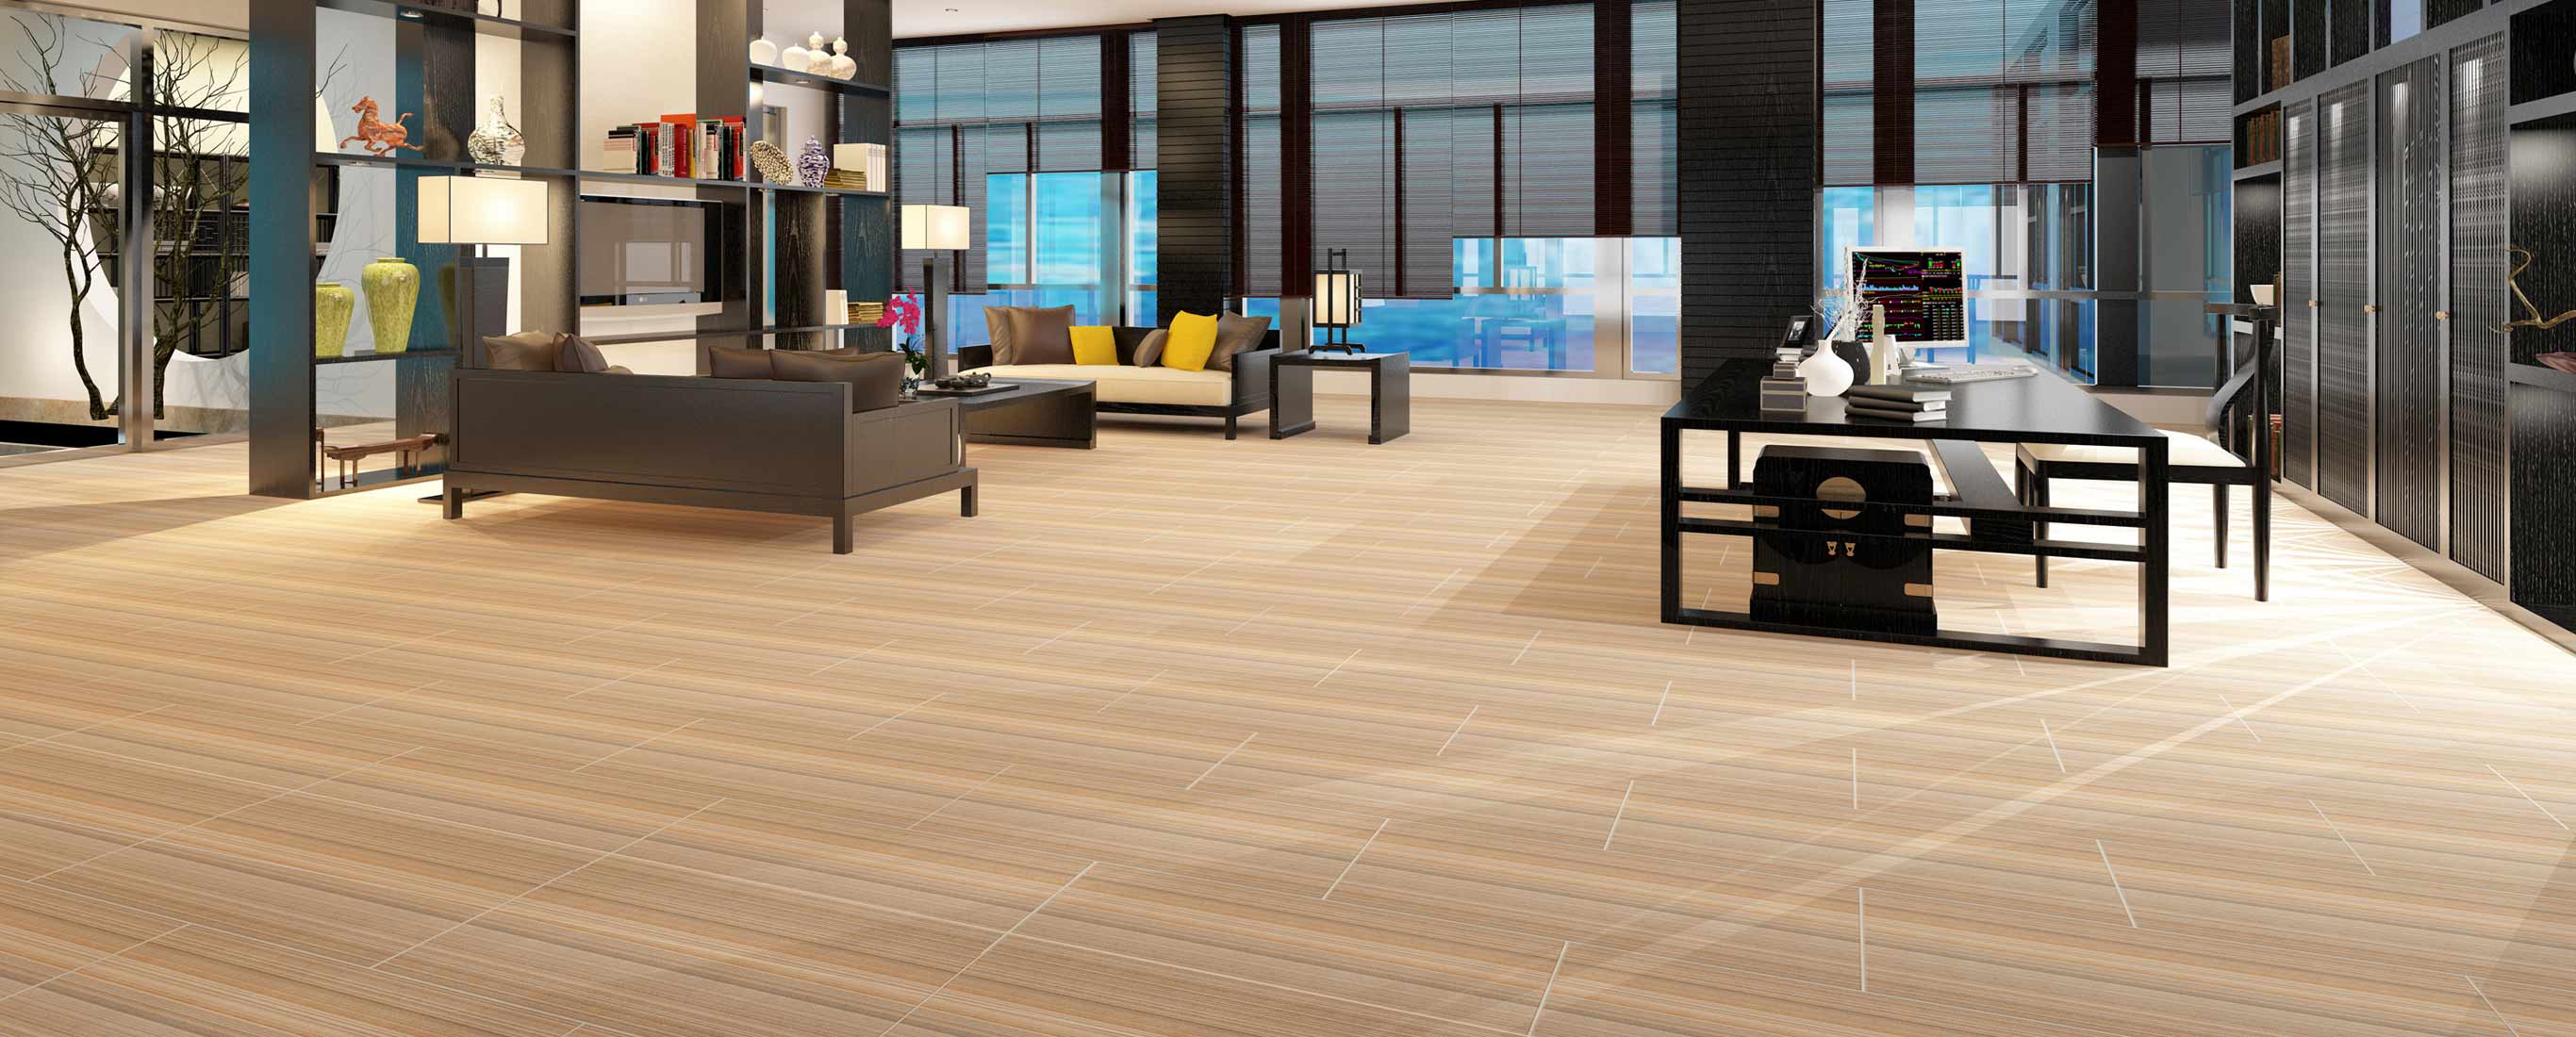 Polished vs Unpolished Porcelain Tile: Which is Better for Your Home Decor?